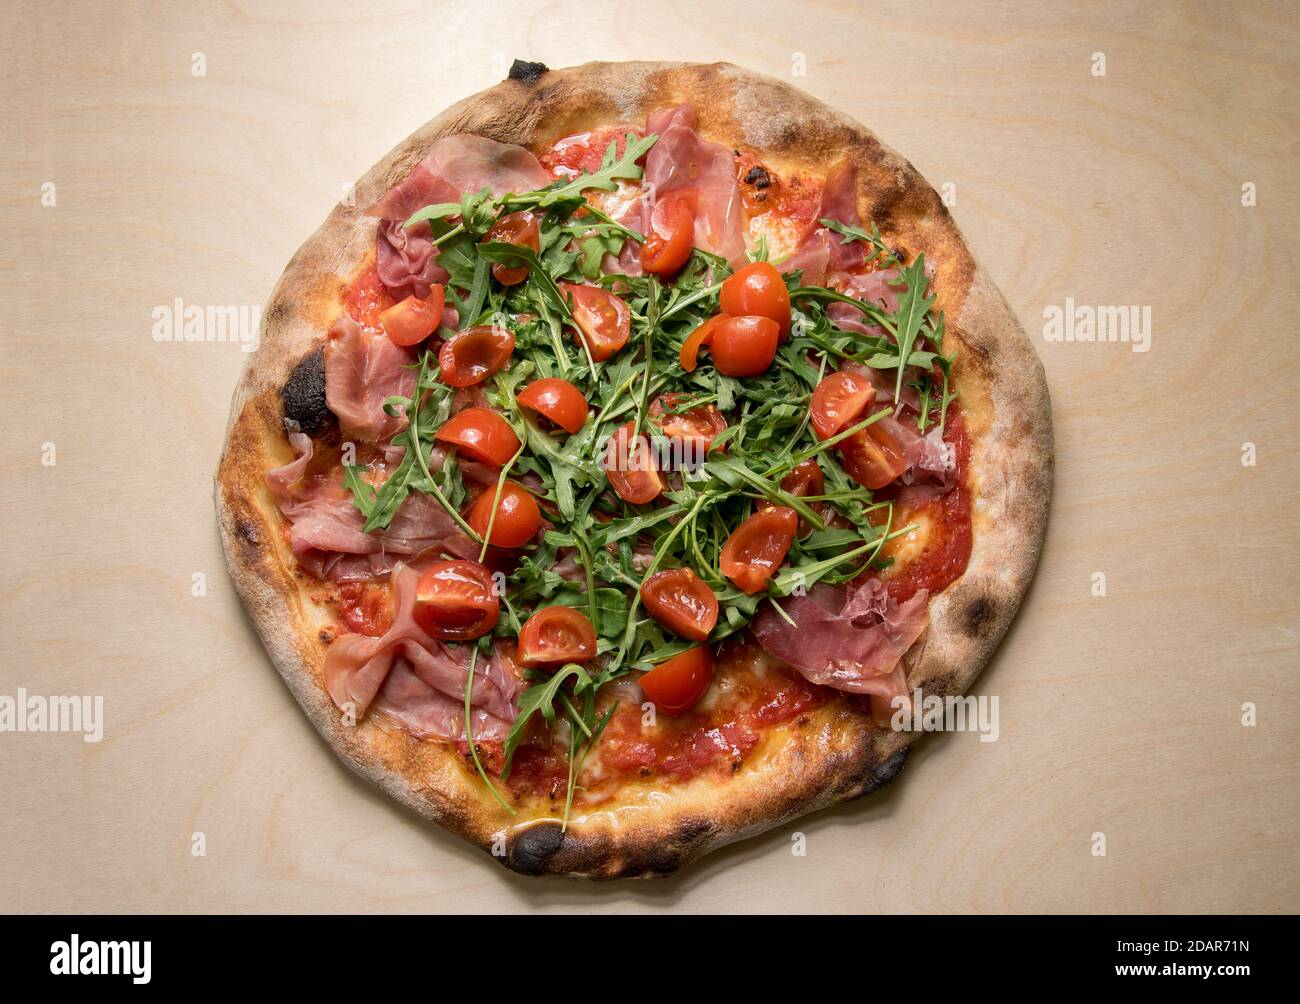 Italian pizza topped with tomato sauce, mozzarella, prosciutto, rocket salad and cherry tomatoes, top view on wooden background Stock Photo